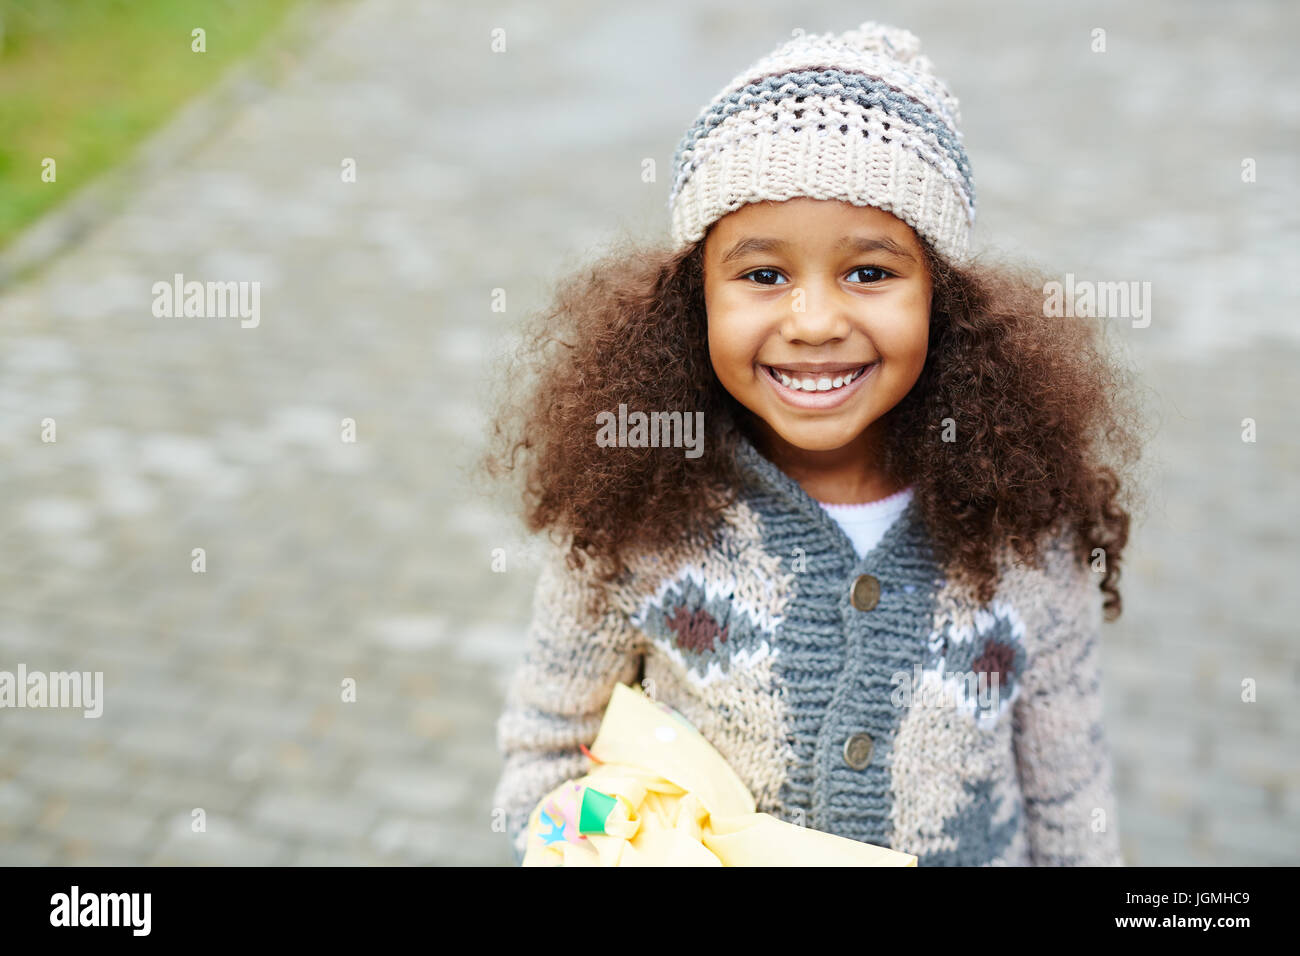 Portrait of cute African-American girl looking up at camera and smiling wearing knit hat and sweater on warm autumn day Stock Photo